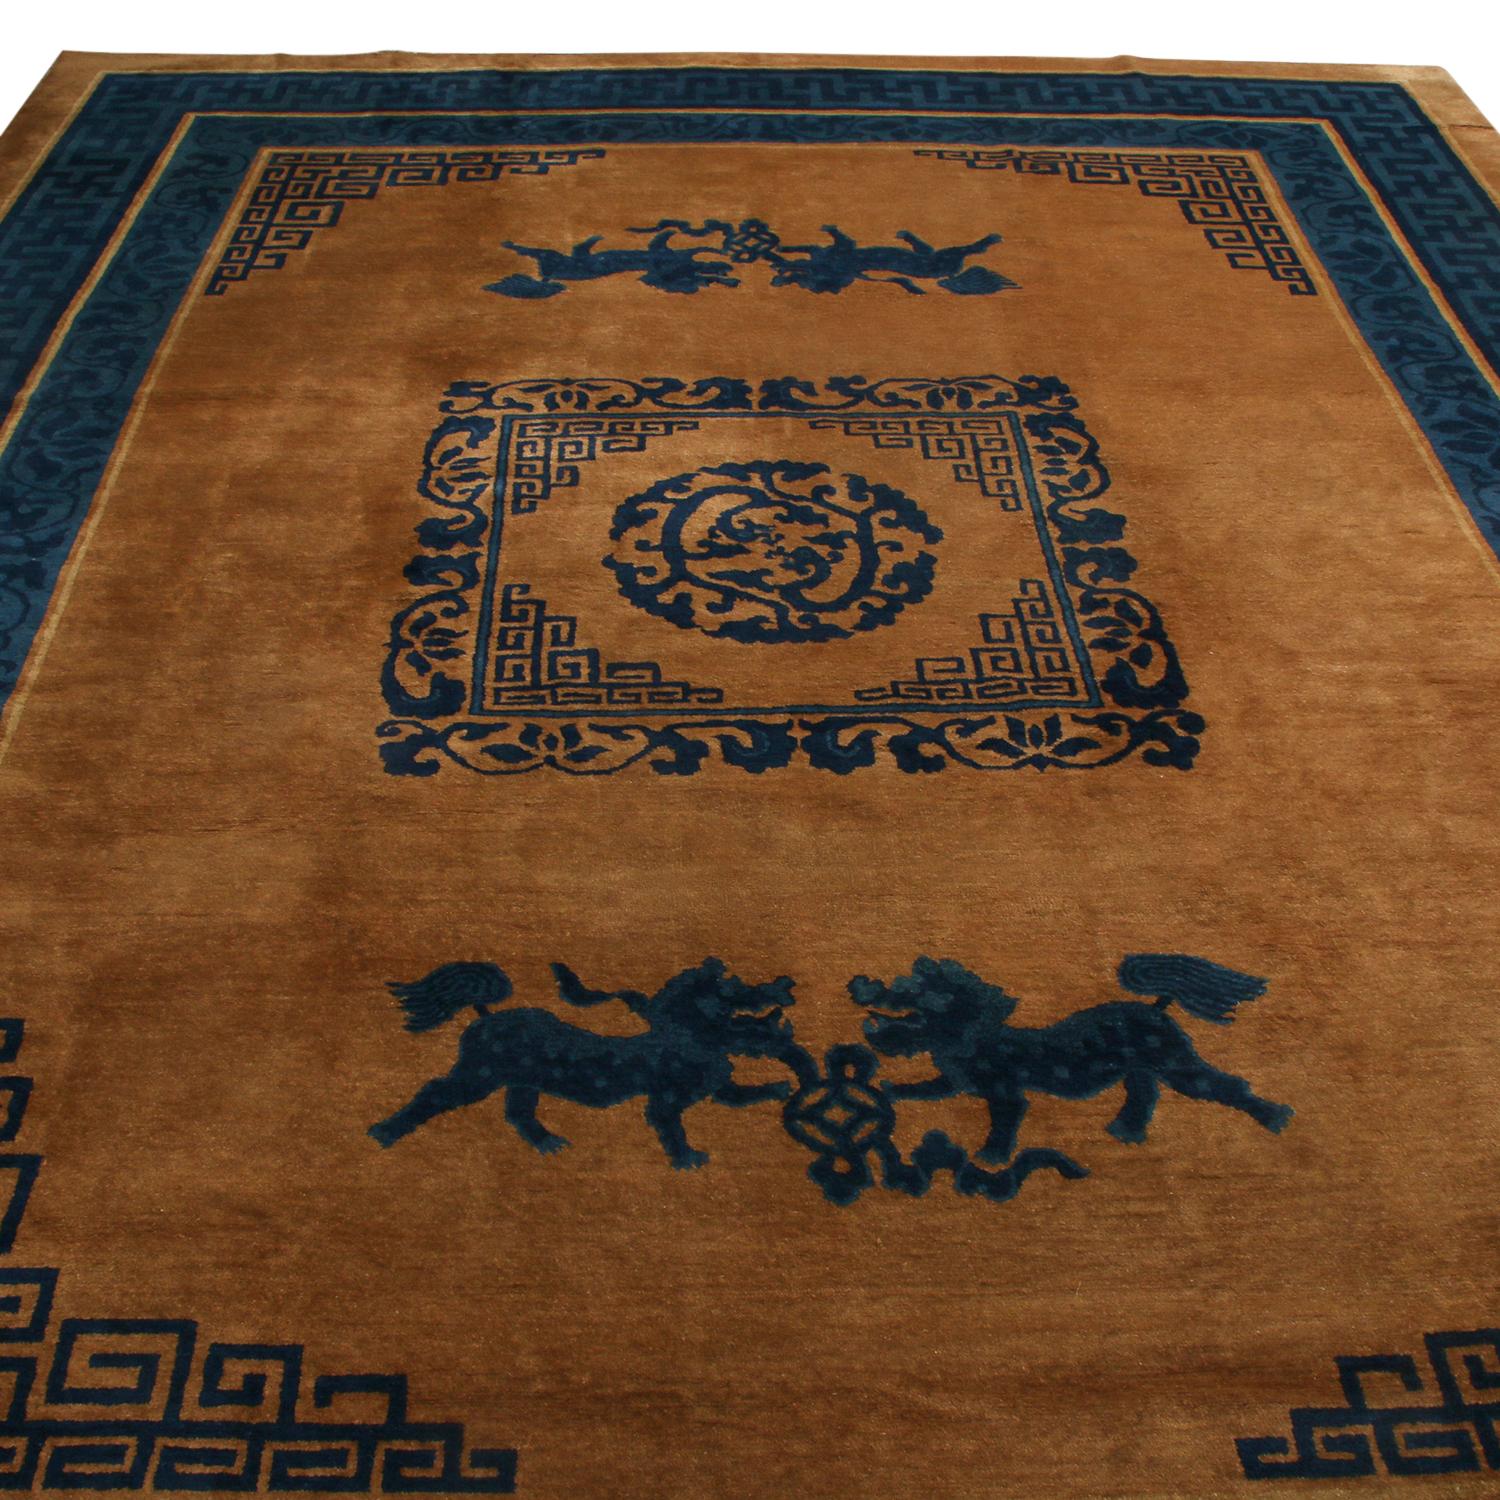 Originating from China in 1900, this antique hand knotted Peking rug embraces iconic elements of early Chinese Art Deco patterns with a distinguished series of symbols among its kind. Featuring high-quality wool in pristine condition, the abrashed